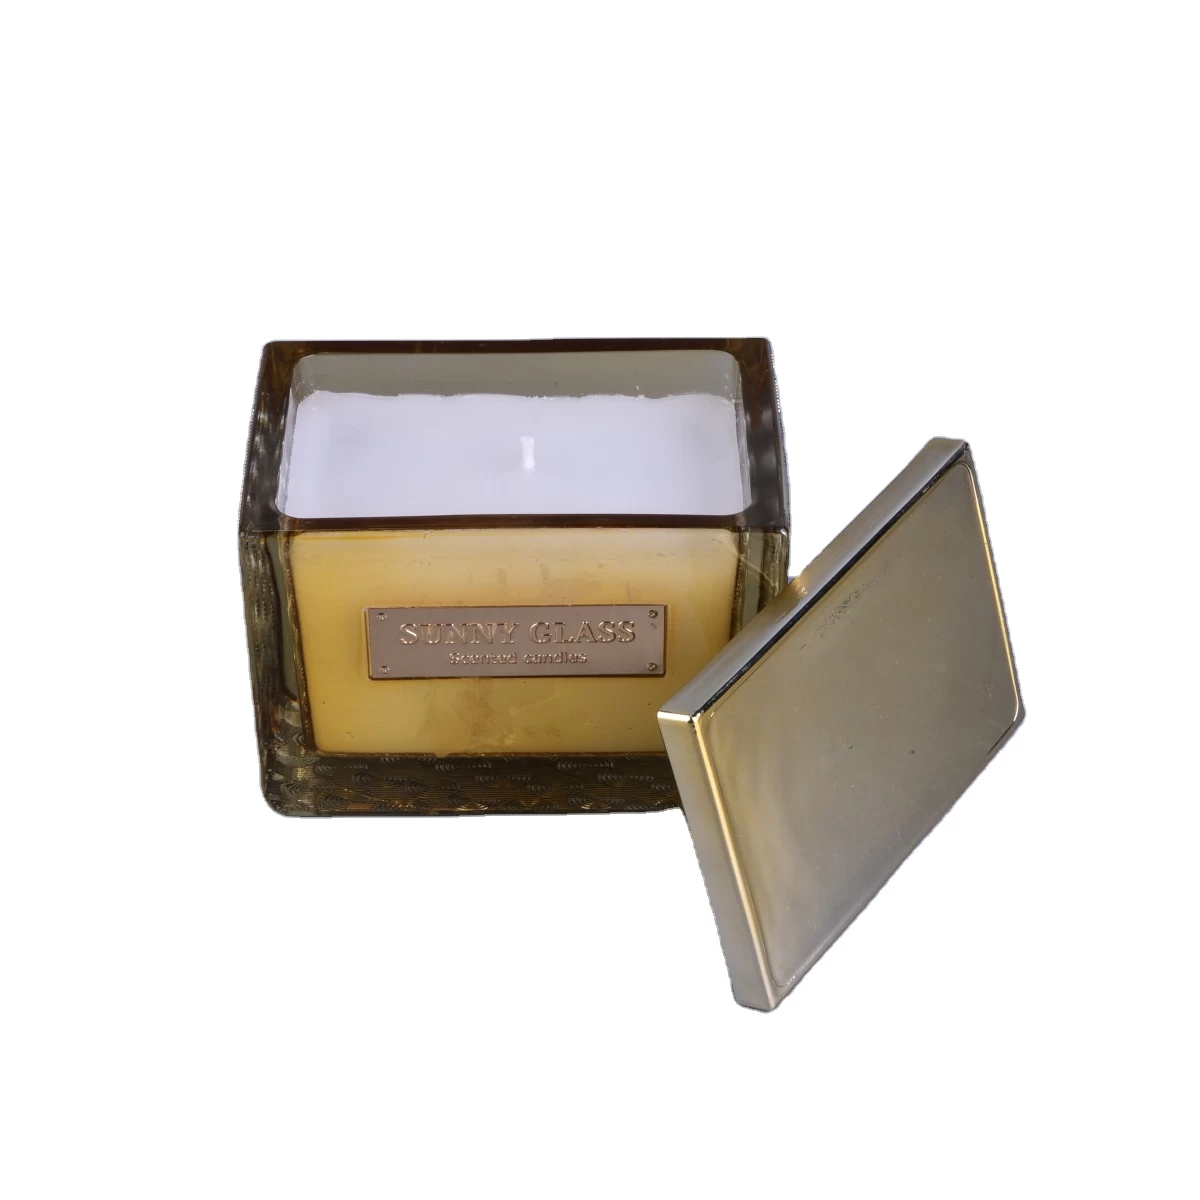 Sunny design golden luxury square glass candle holder and lid